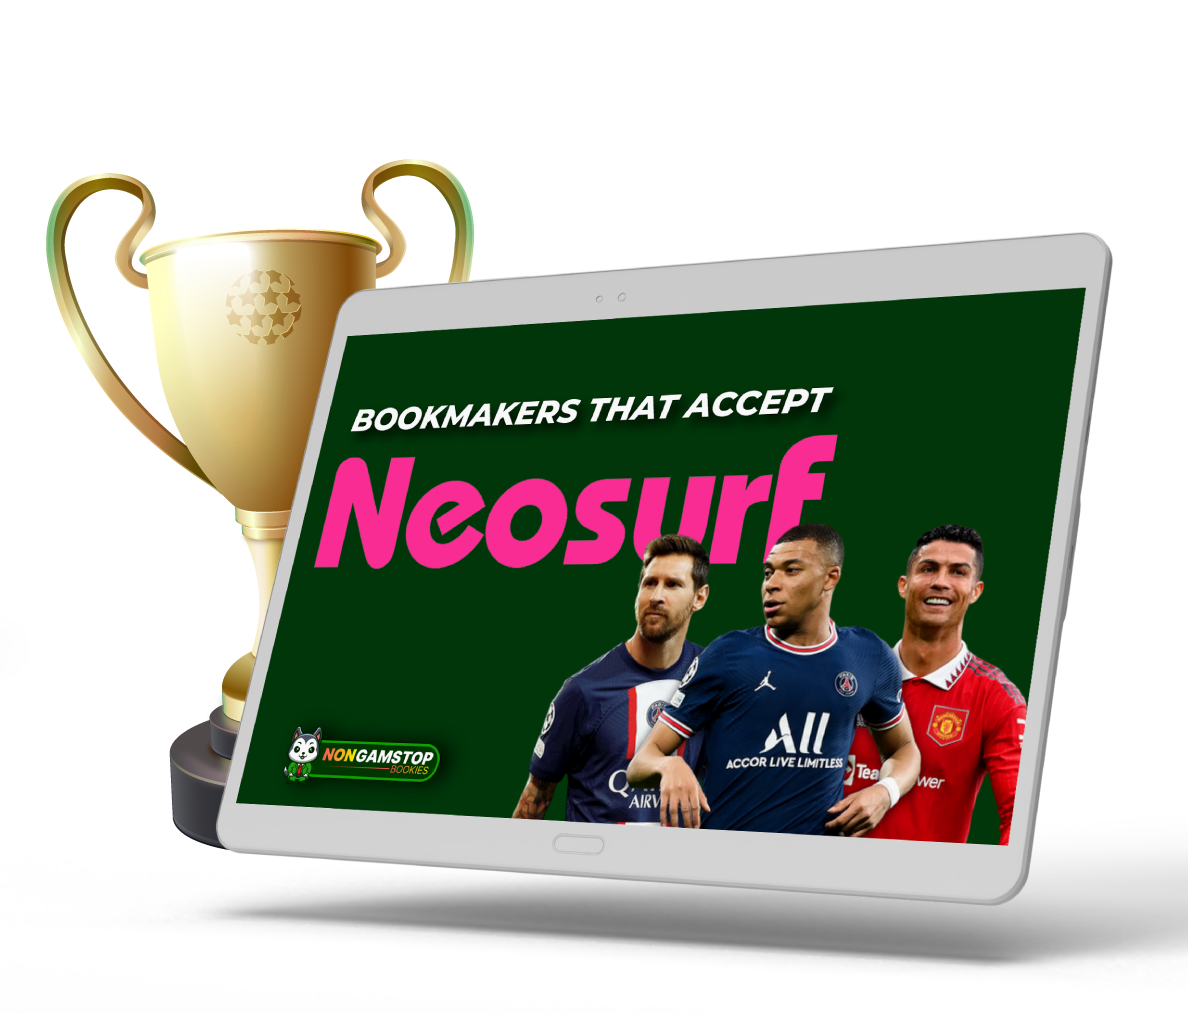 Bookmakers That Accept Neosurf